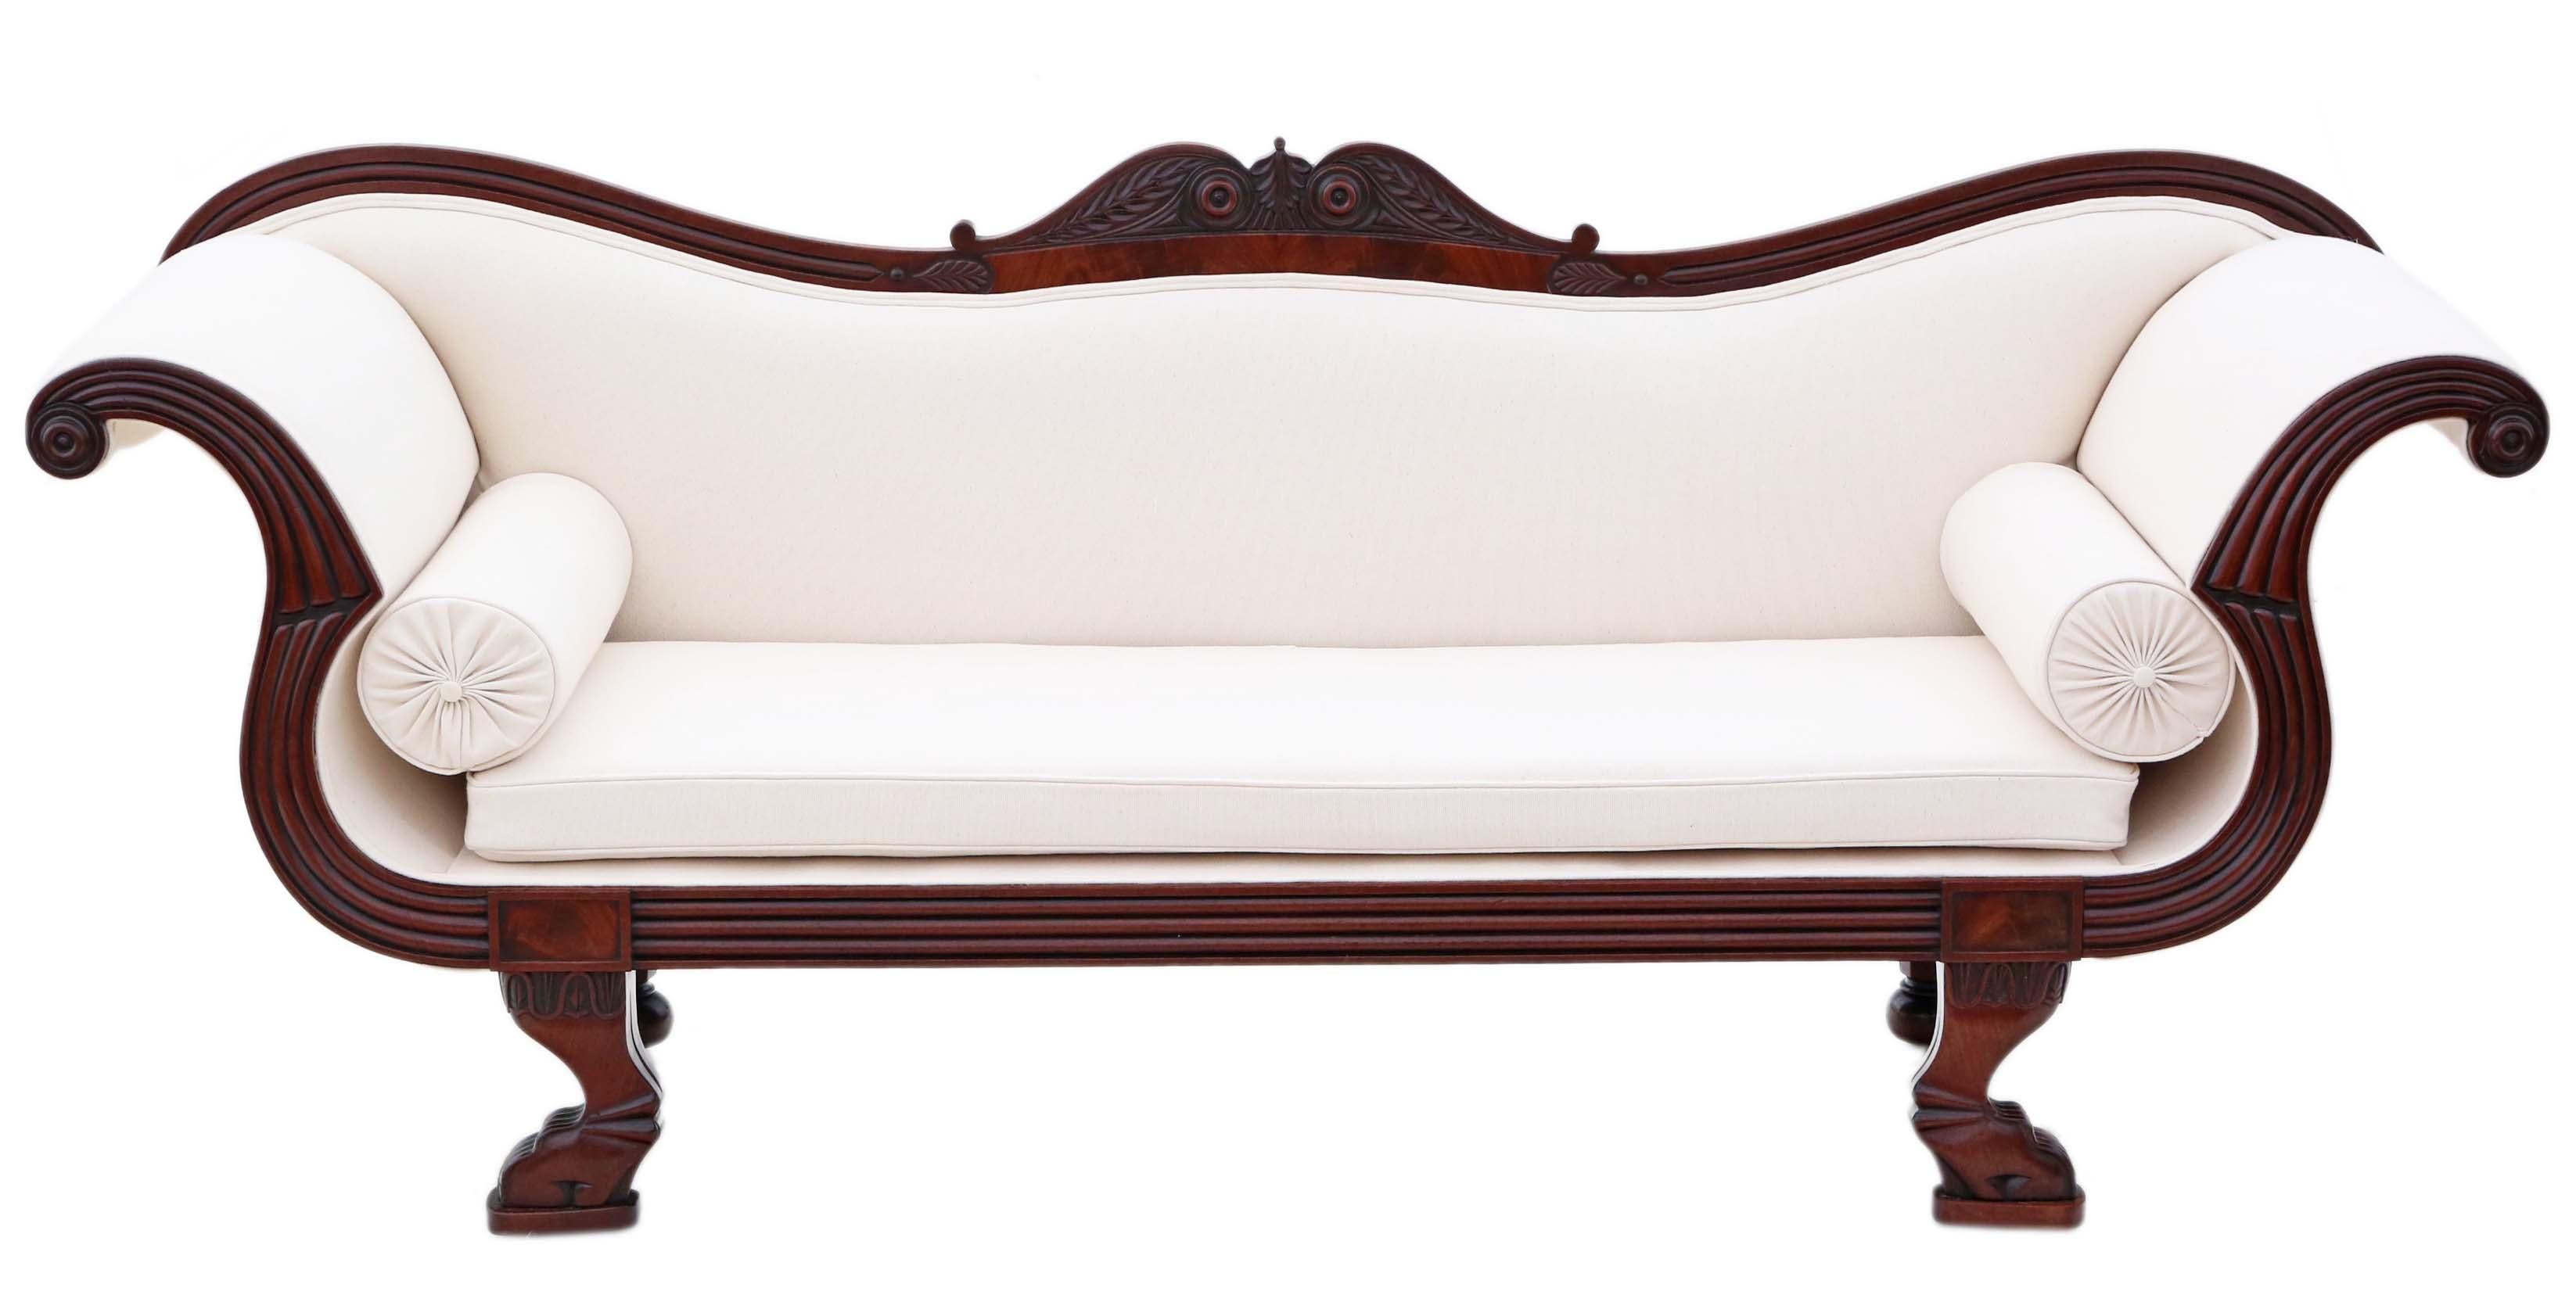 Antique very fine quality 19th Century mahogany scroll arm sofa. An exceptionally beautiful statement piece of the finest quality.

Solid and strong, with no loose joints. Full of age, character and charm. This piece has new professional